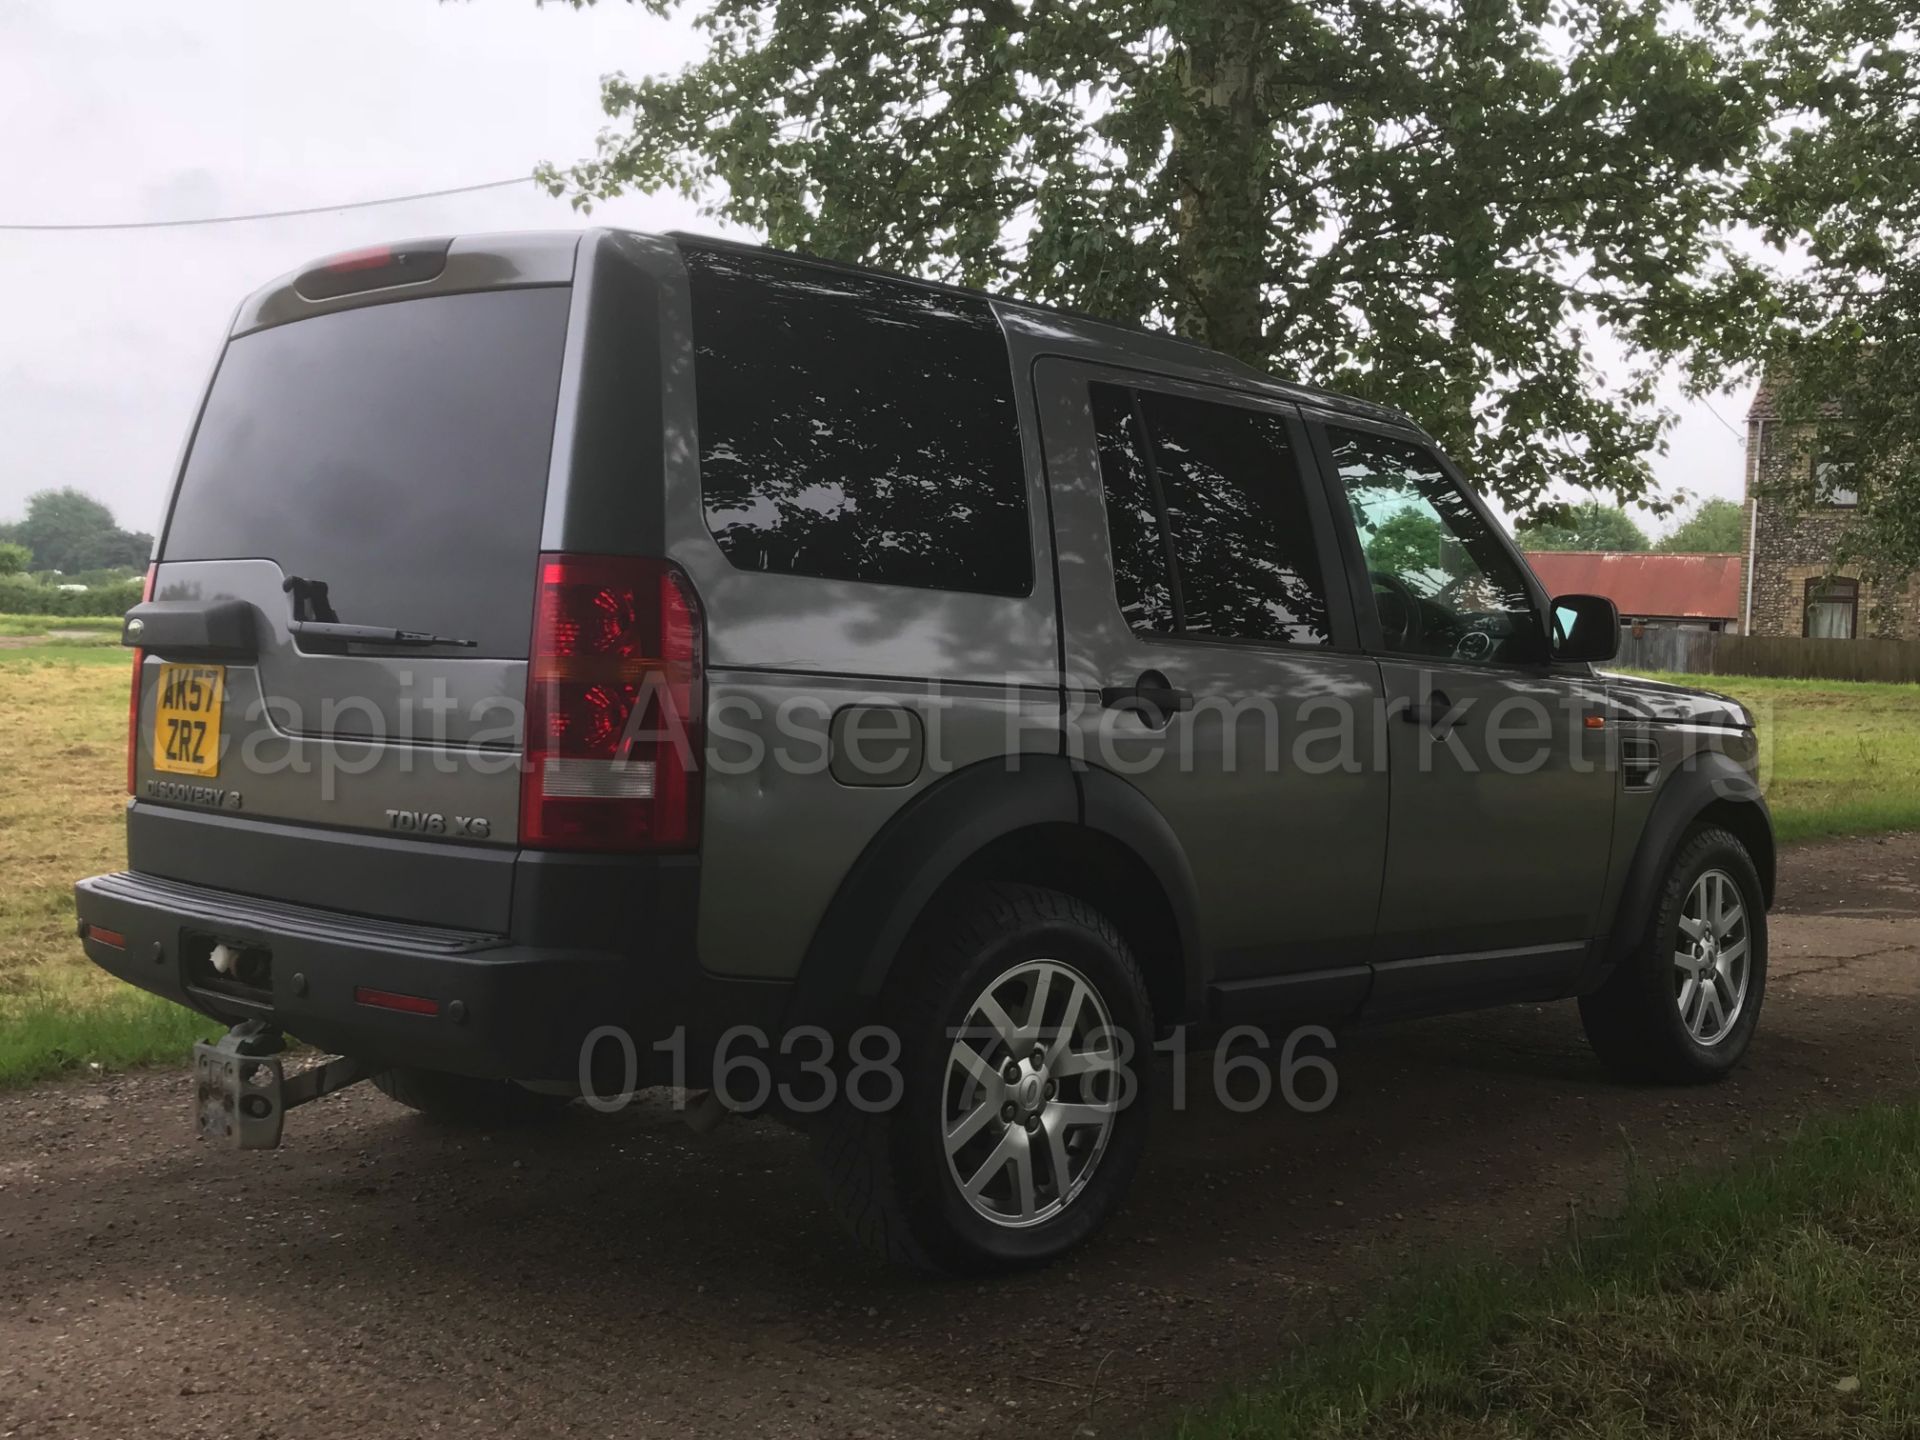 (On Sale) LAND ROVER DISCOVERY 3 'XS EDITION' **COMMERCIAL VAN**(2008 MODEL) 'TDV6-190 BHP' (NO VAT) - Image 11 of 38